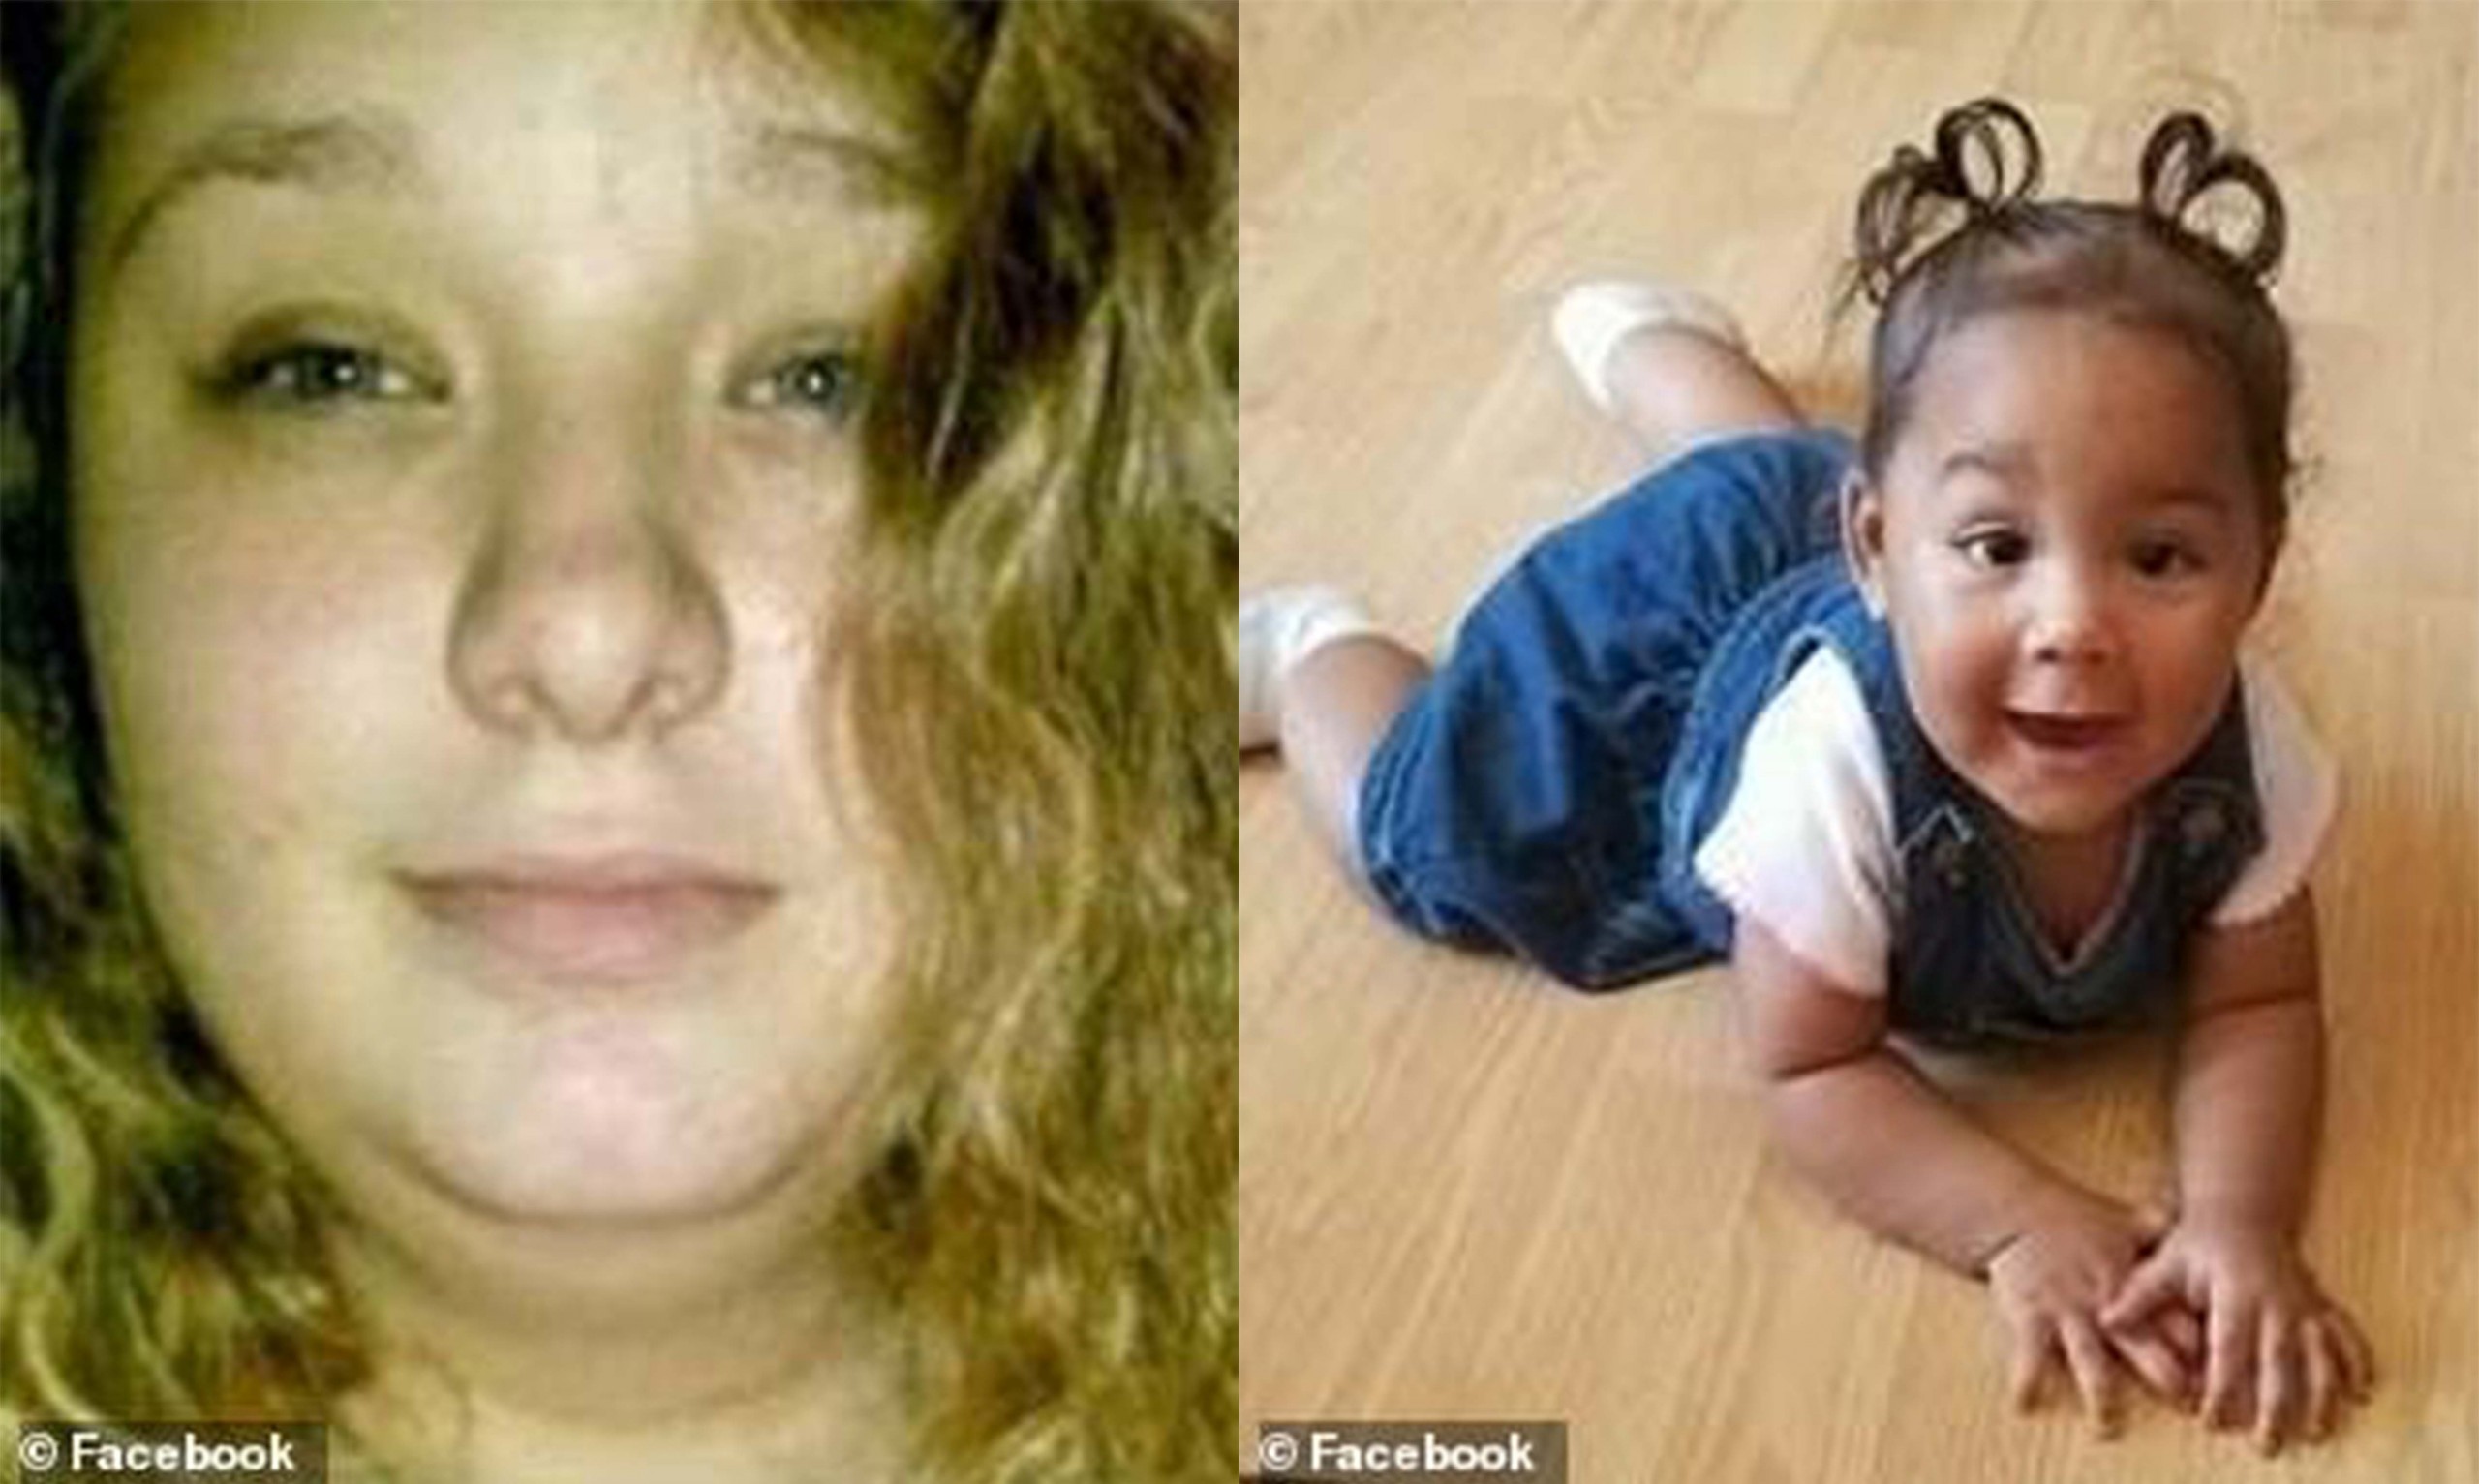 Amber Weber (left), her daughter Miracle Smith, 5 (right), and a younger child were found on Tuesday living in a trailer in North Carolina, more than five years after their disappearance